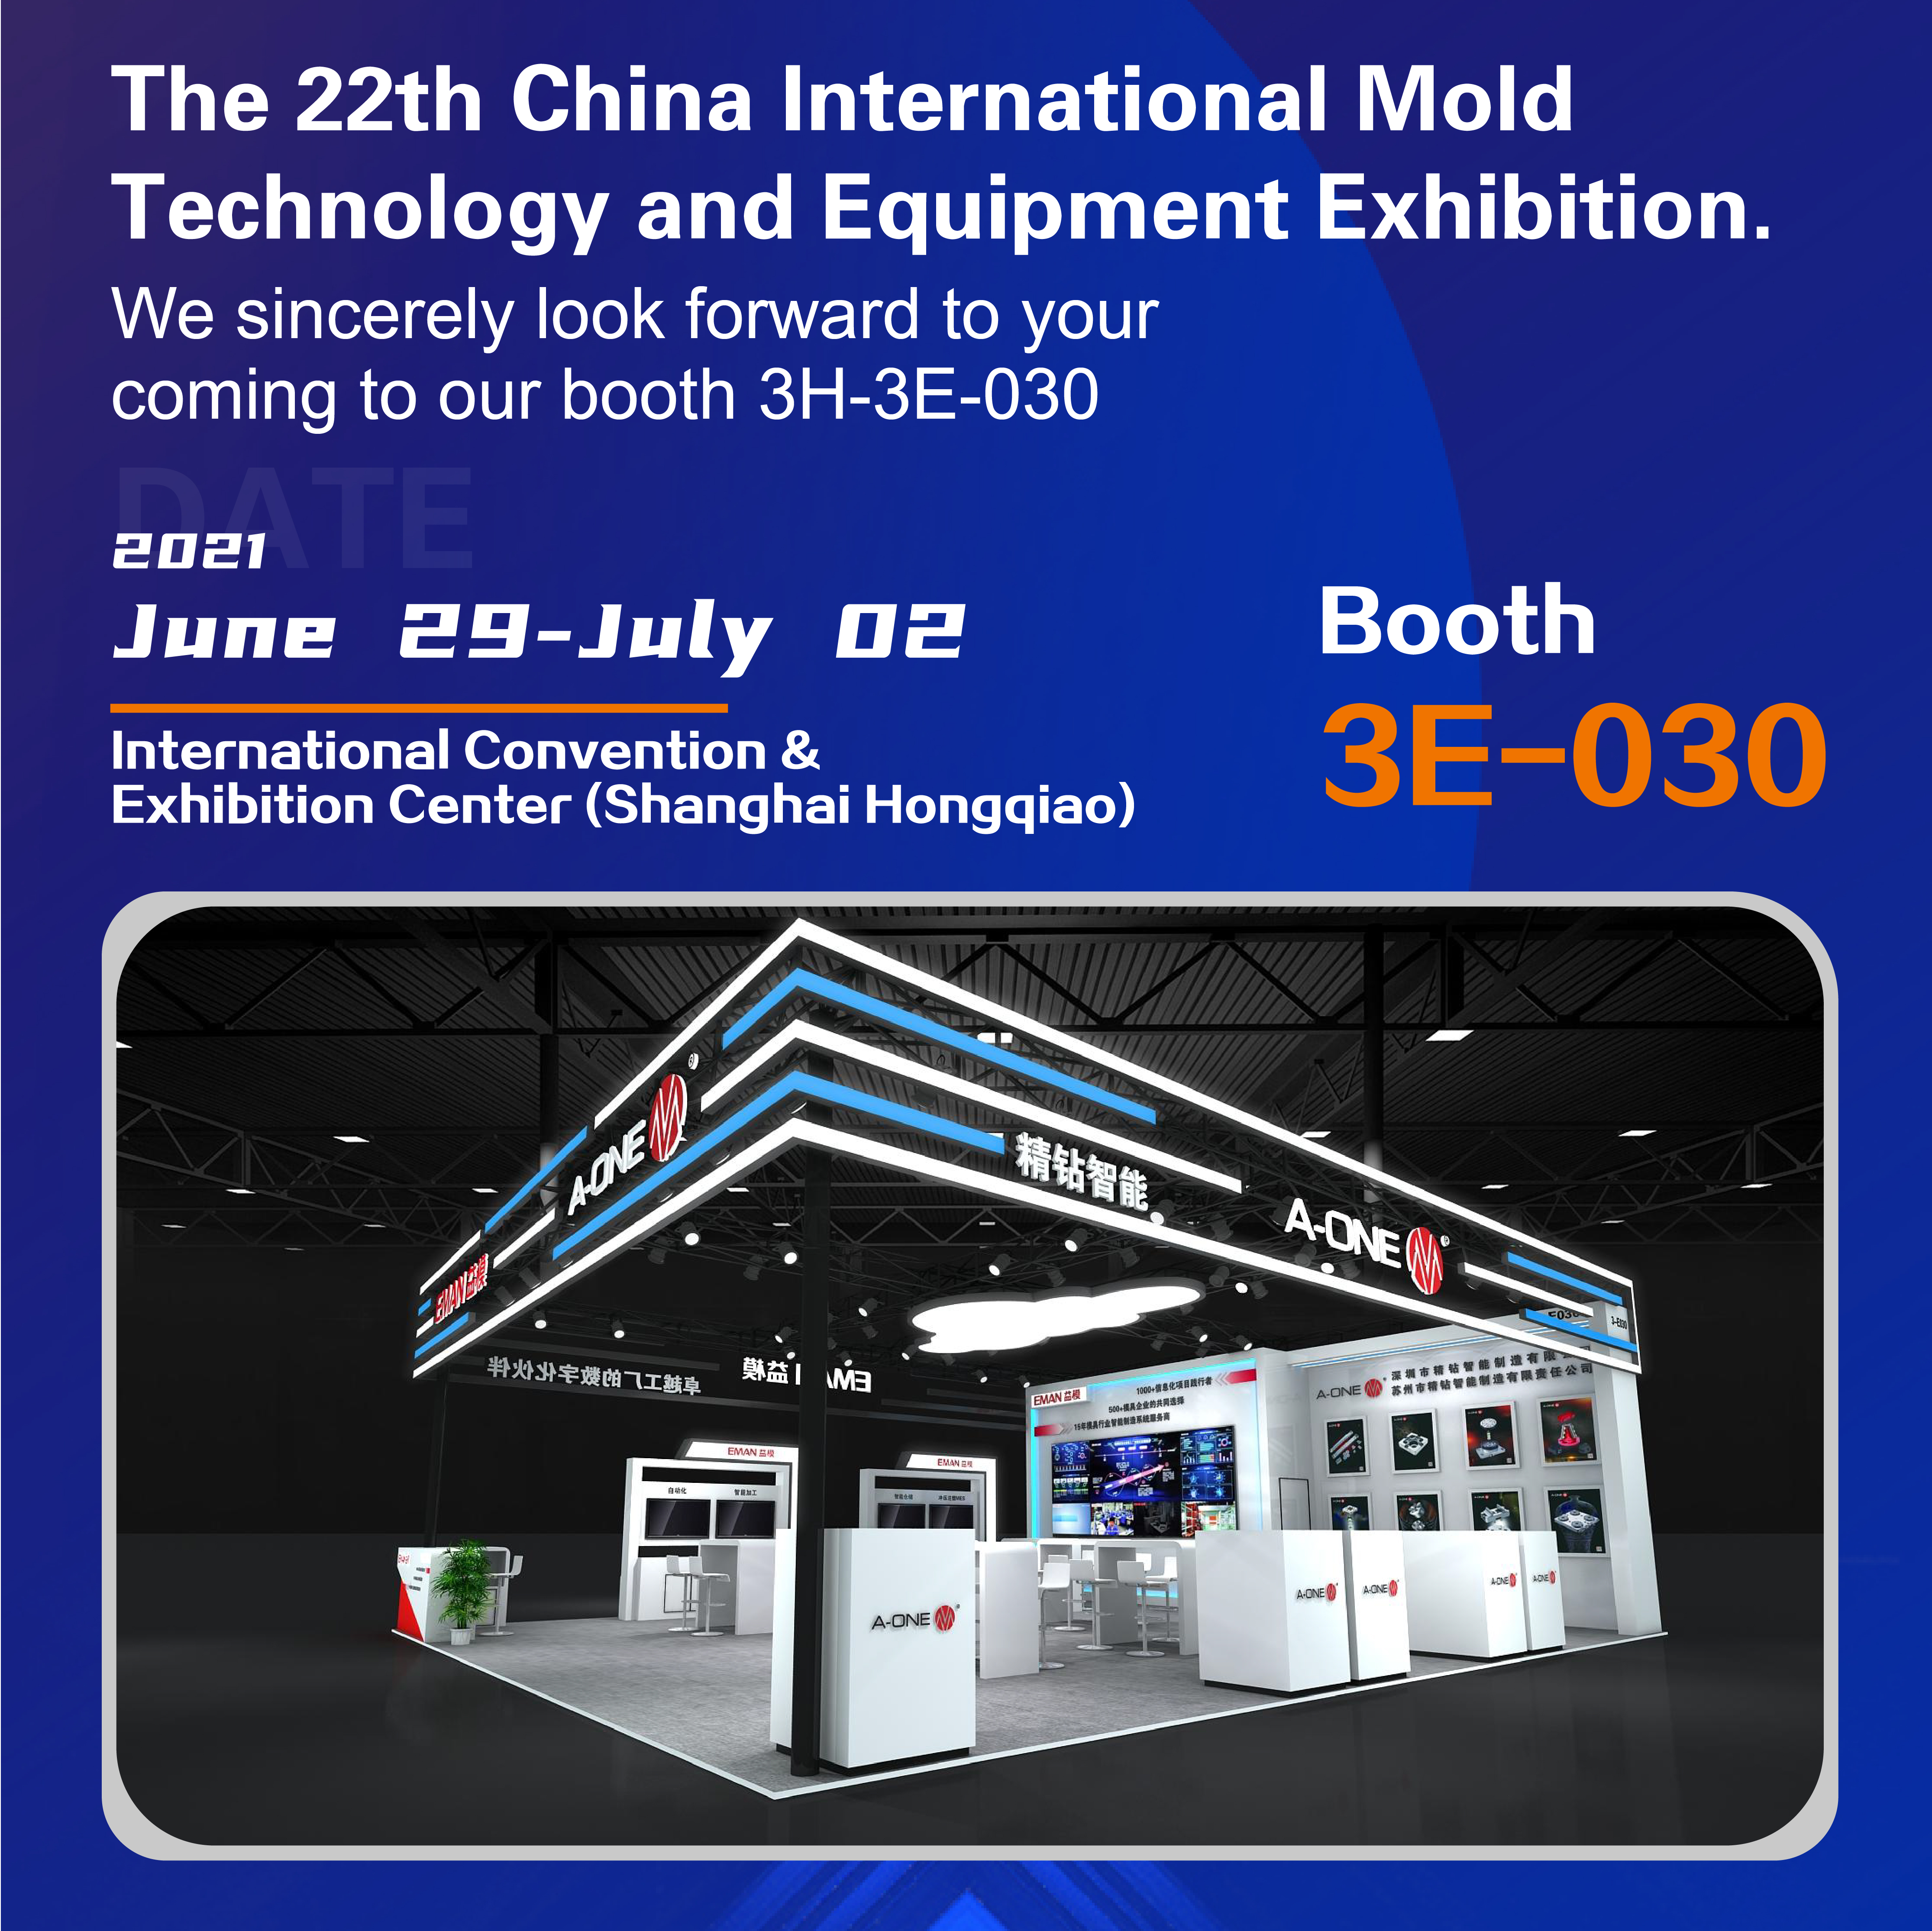 The 21th International mold technology and equipment exhibition